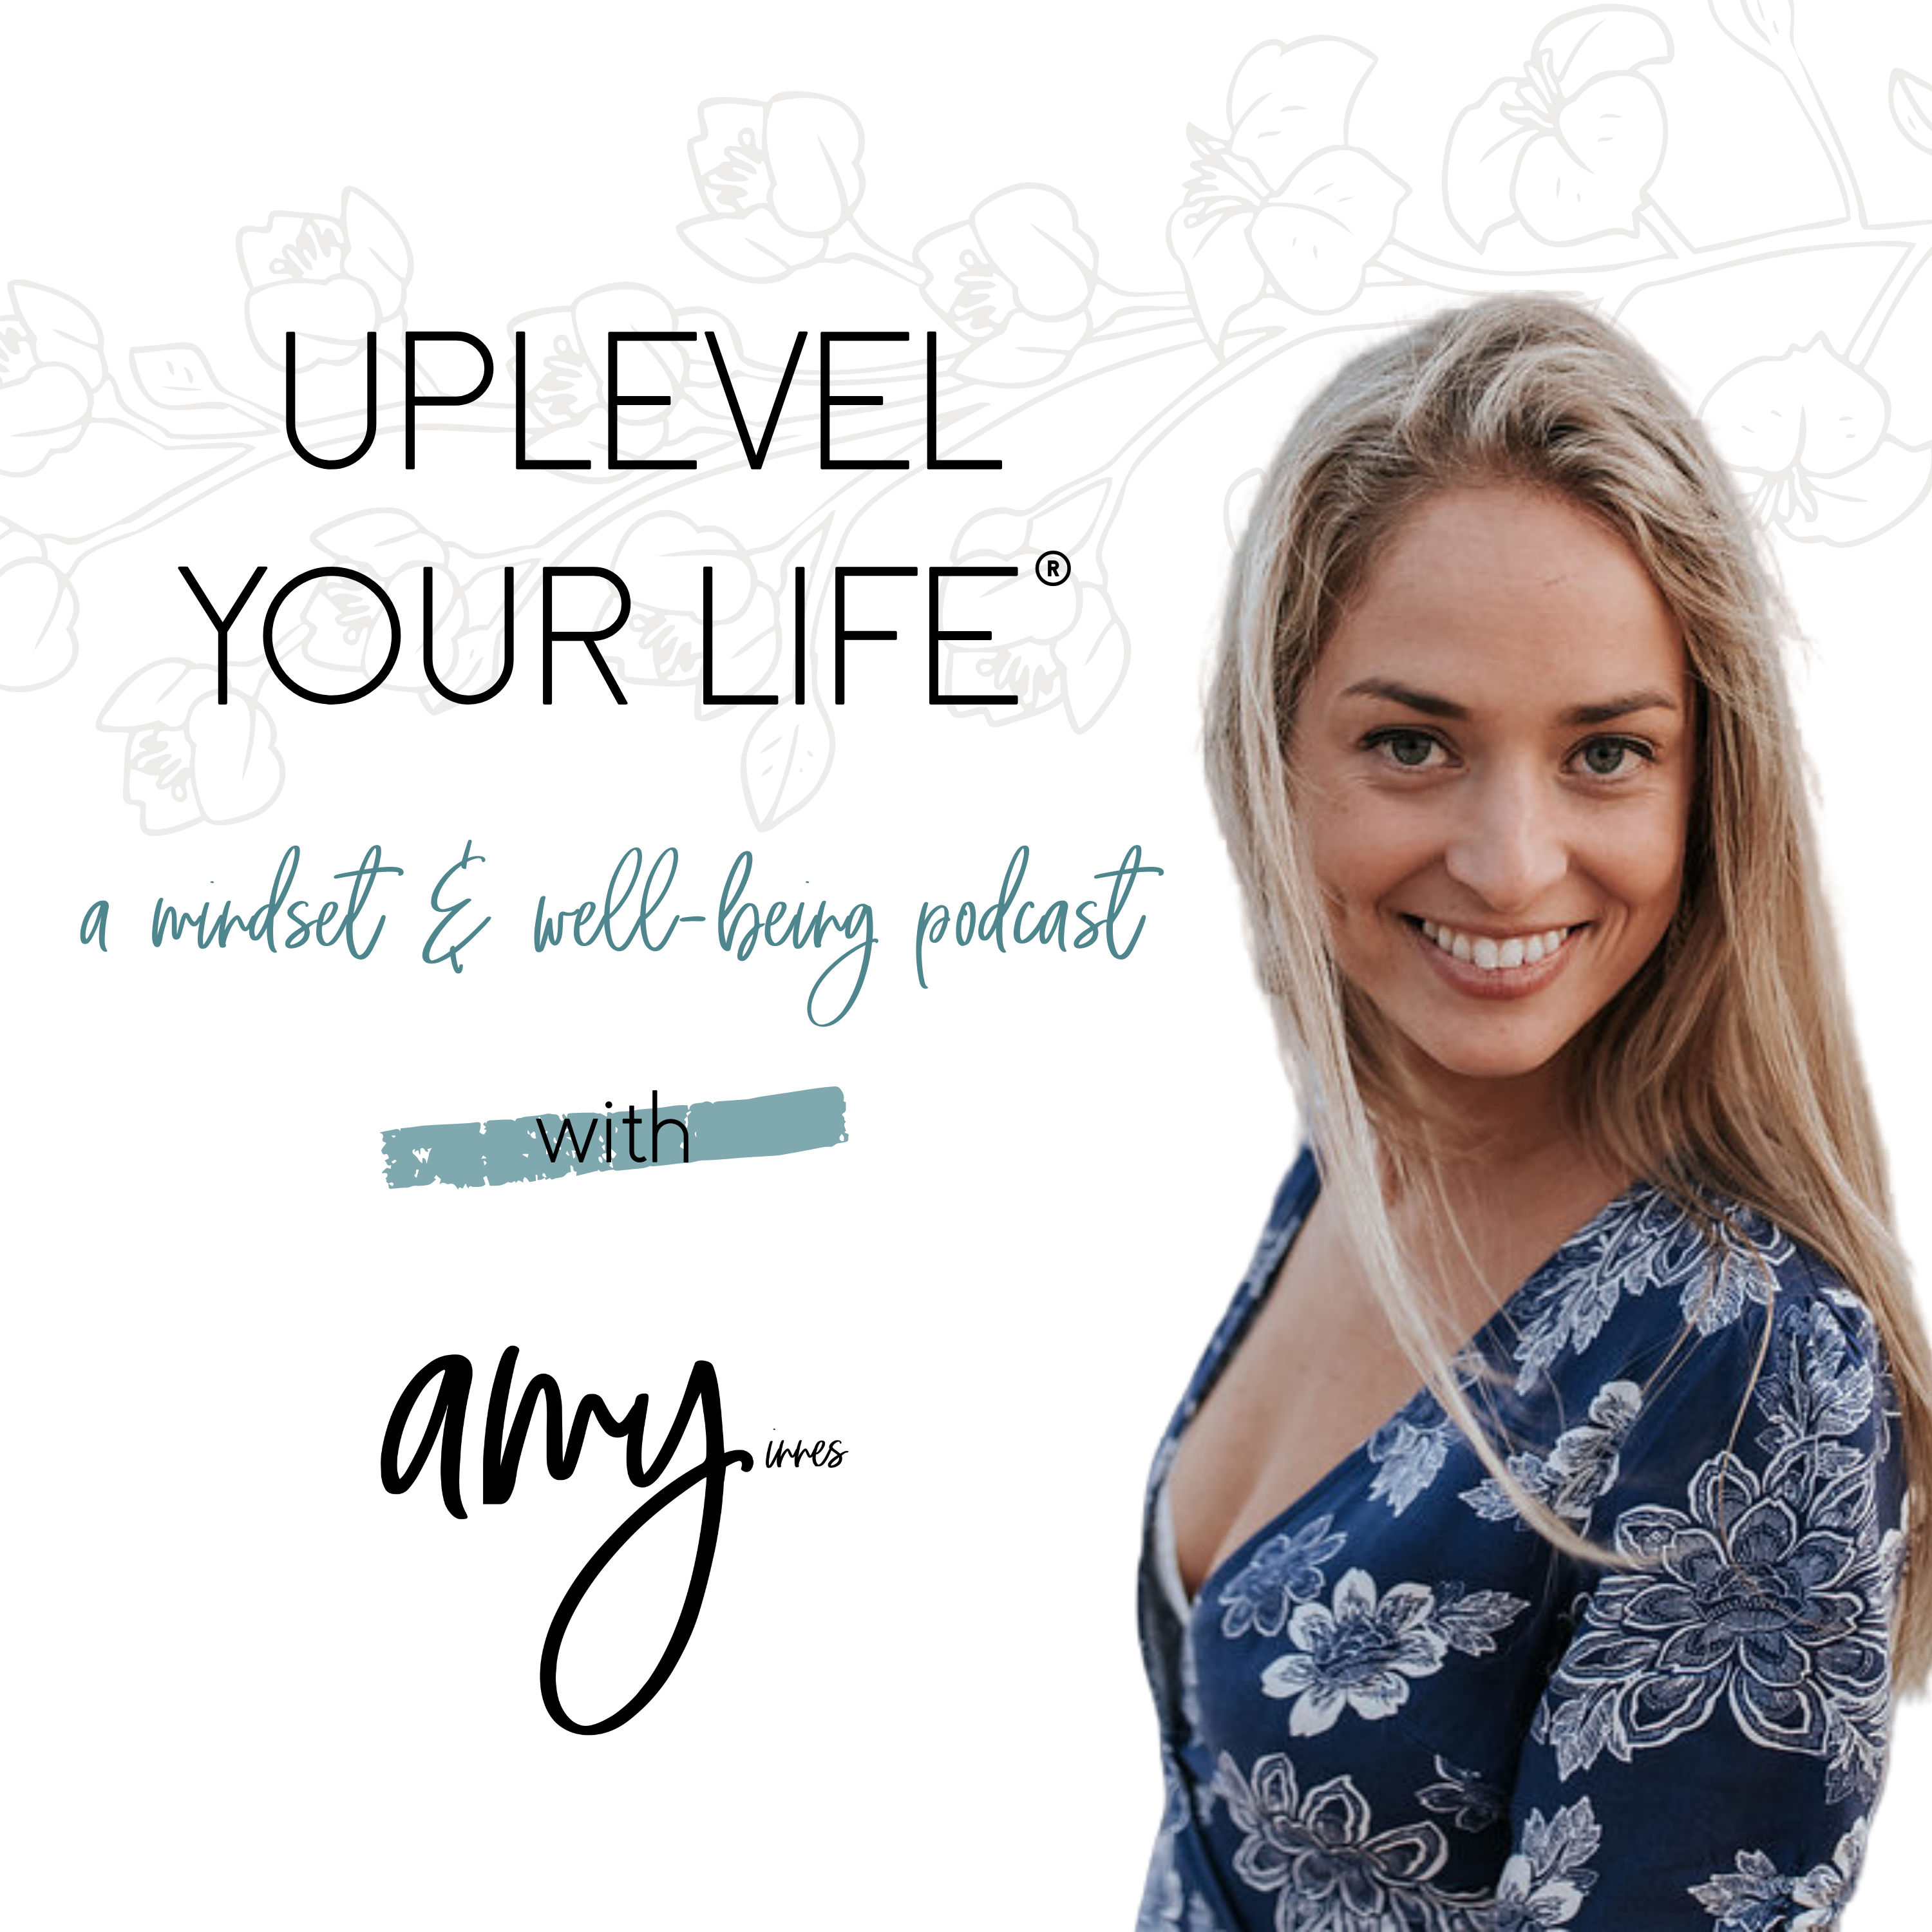 Ep 60: Meg Berryman - Regenerative ways to live, lead, learn and do business